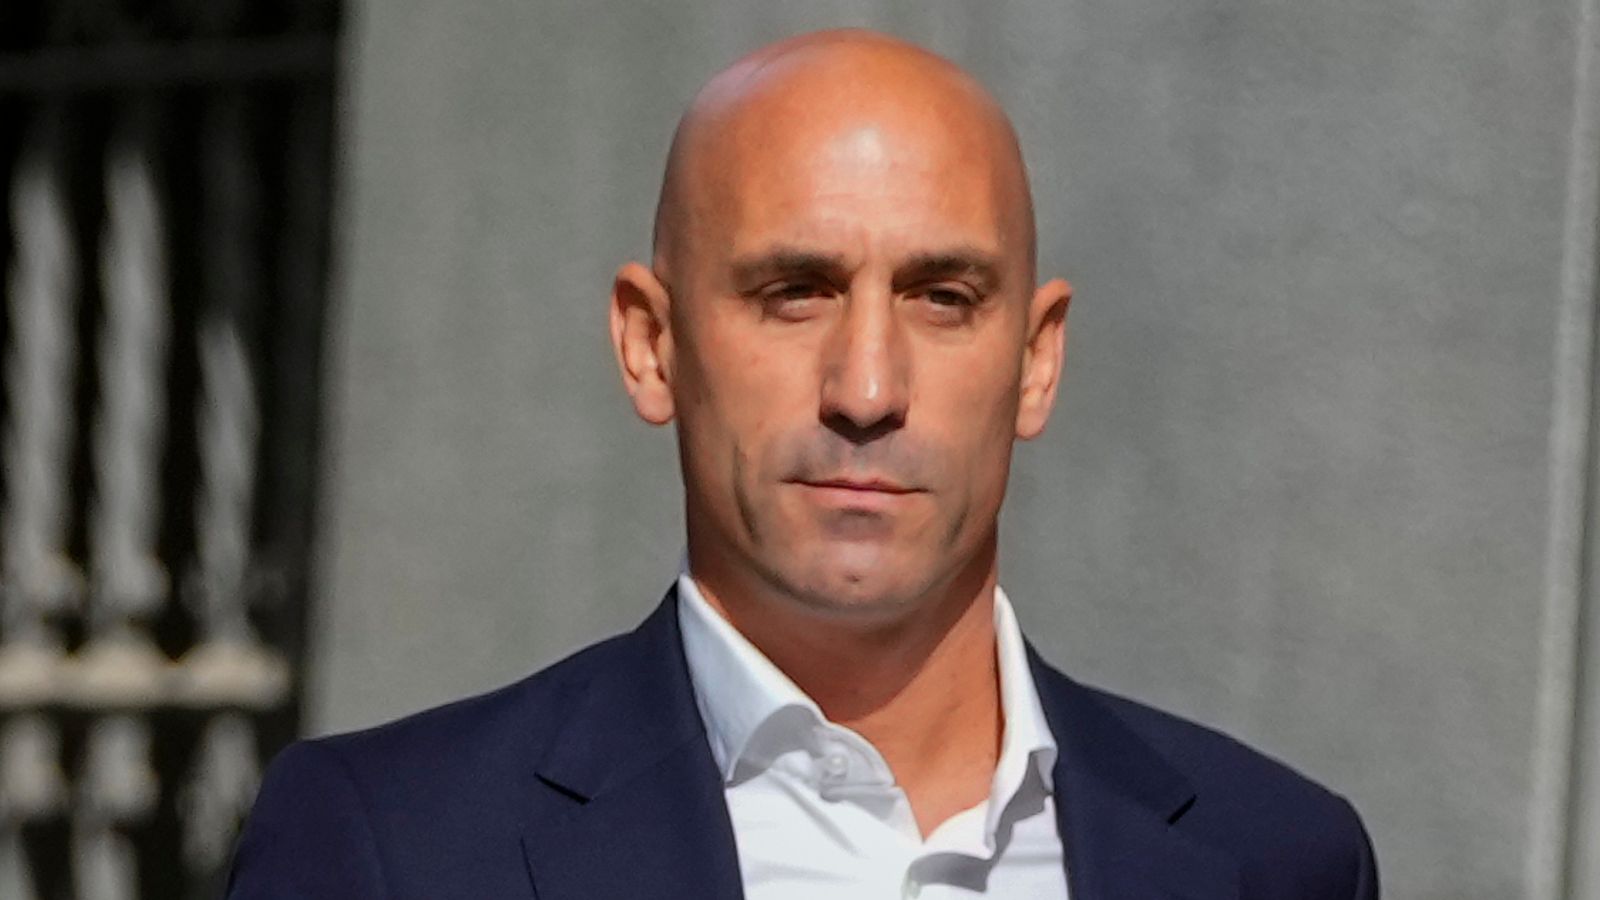 Luis Rubiales to stand trial for kissing player